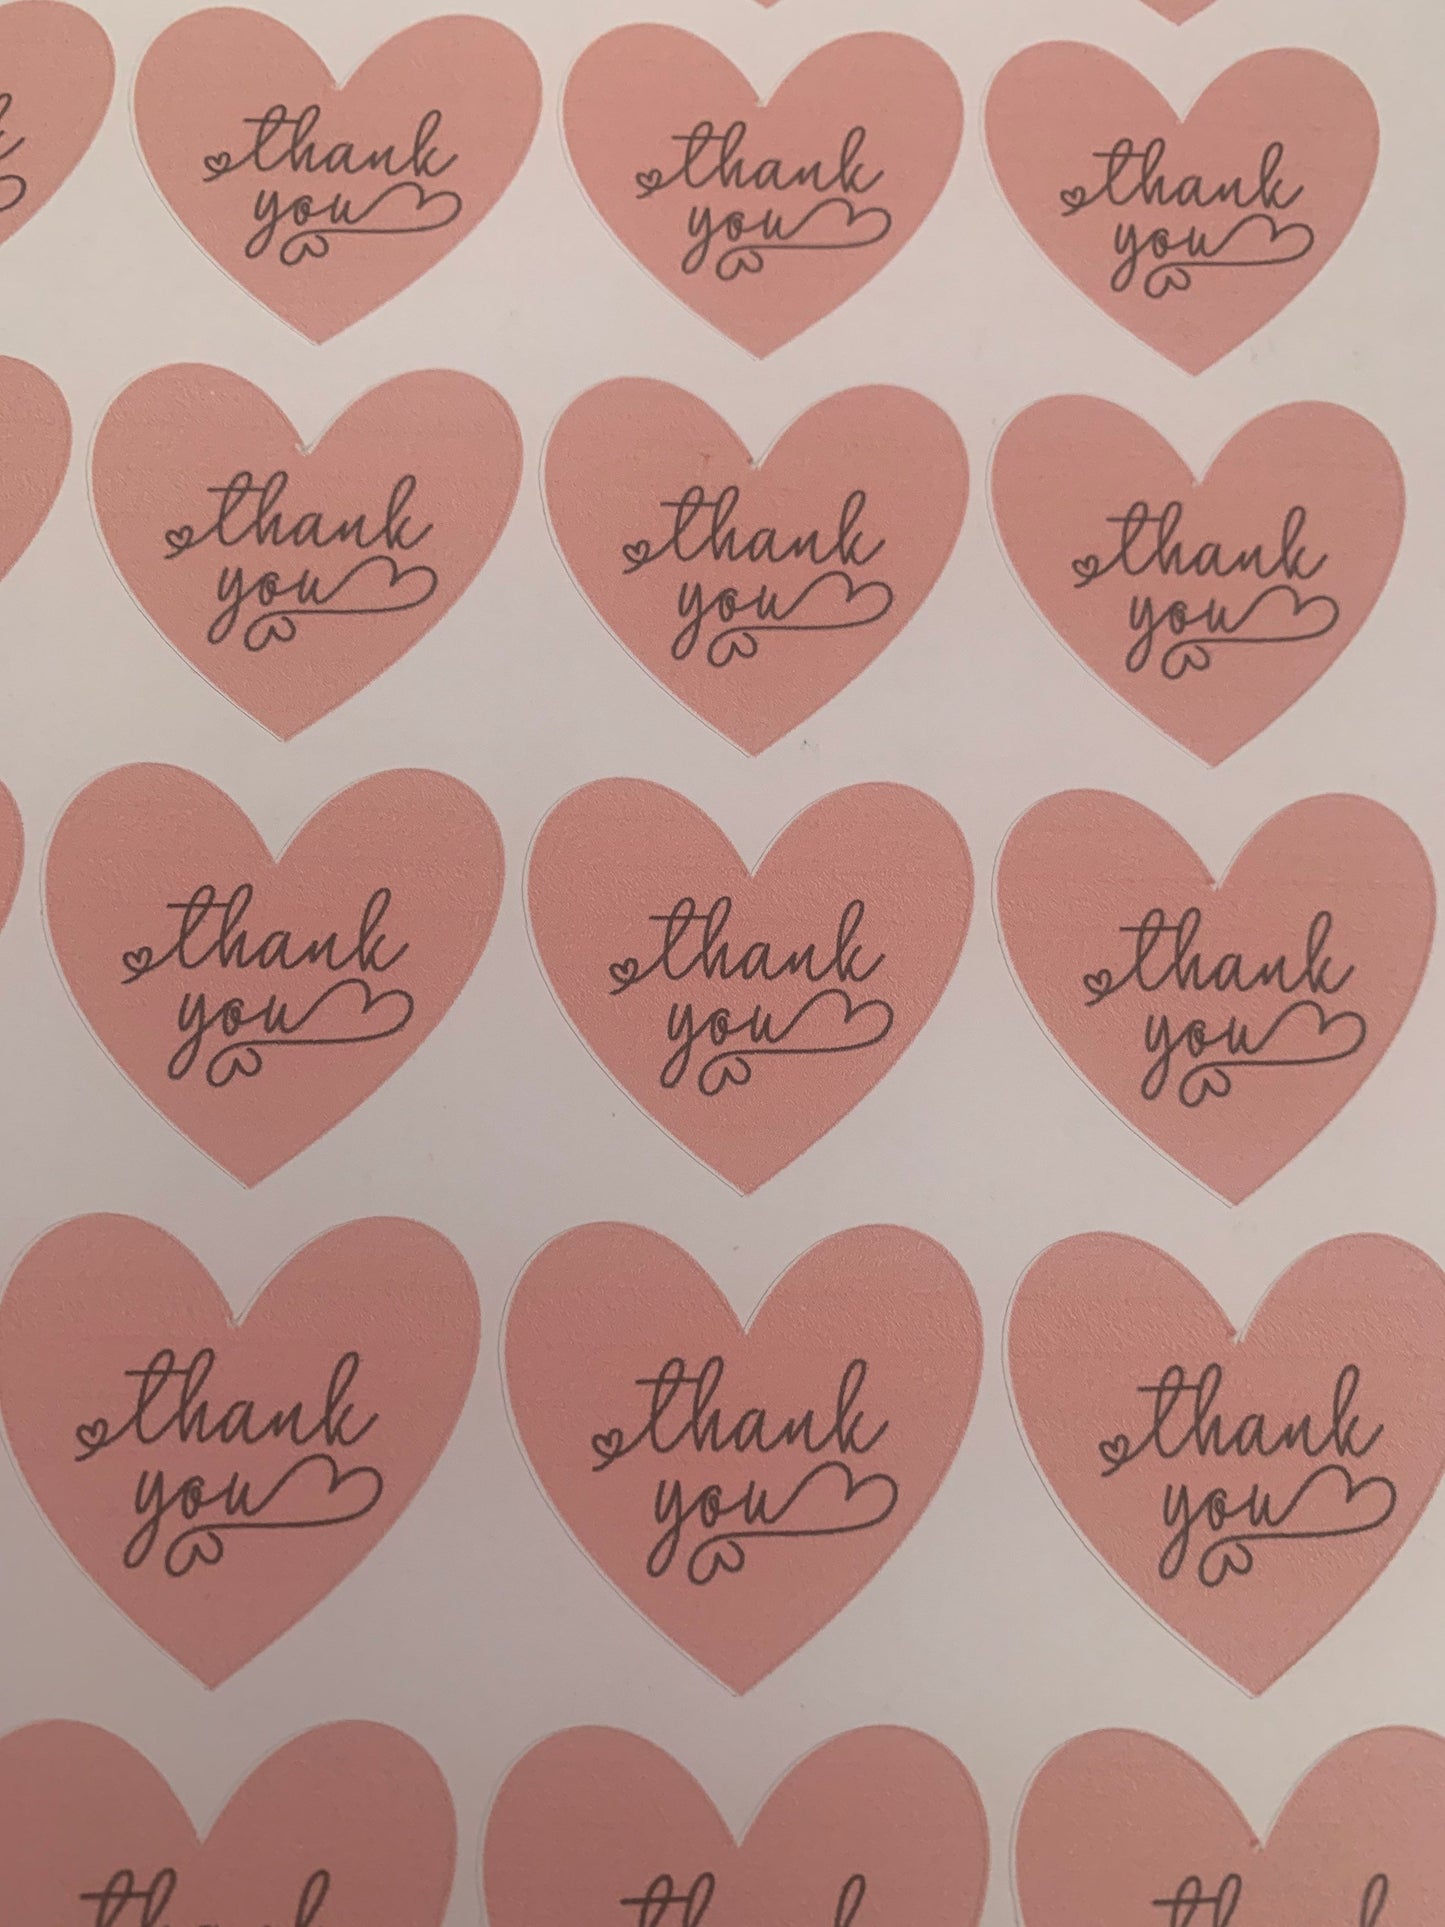 24 thank you love heart stickers